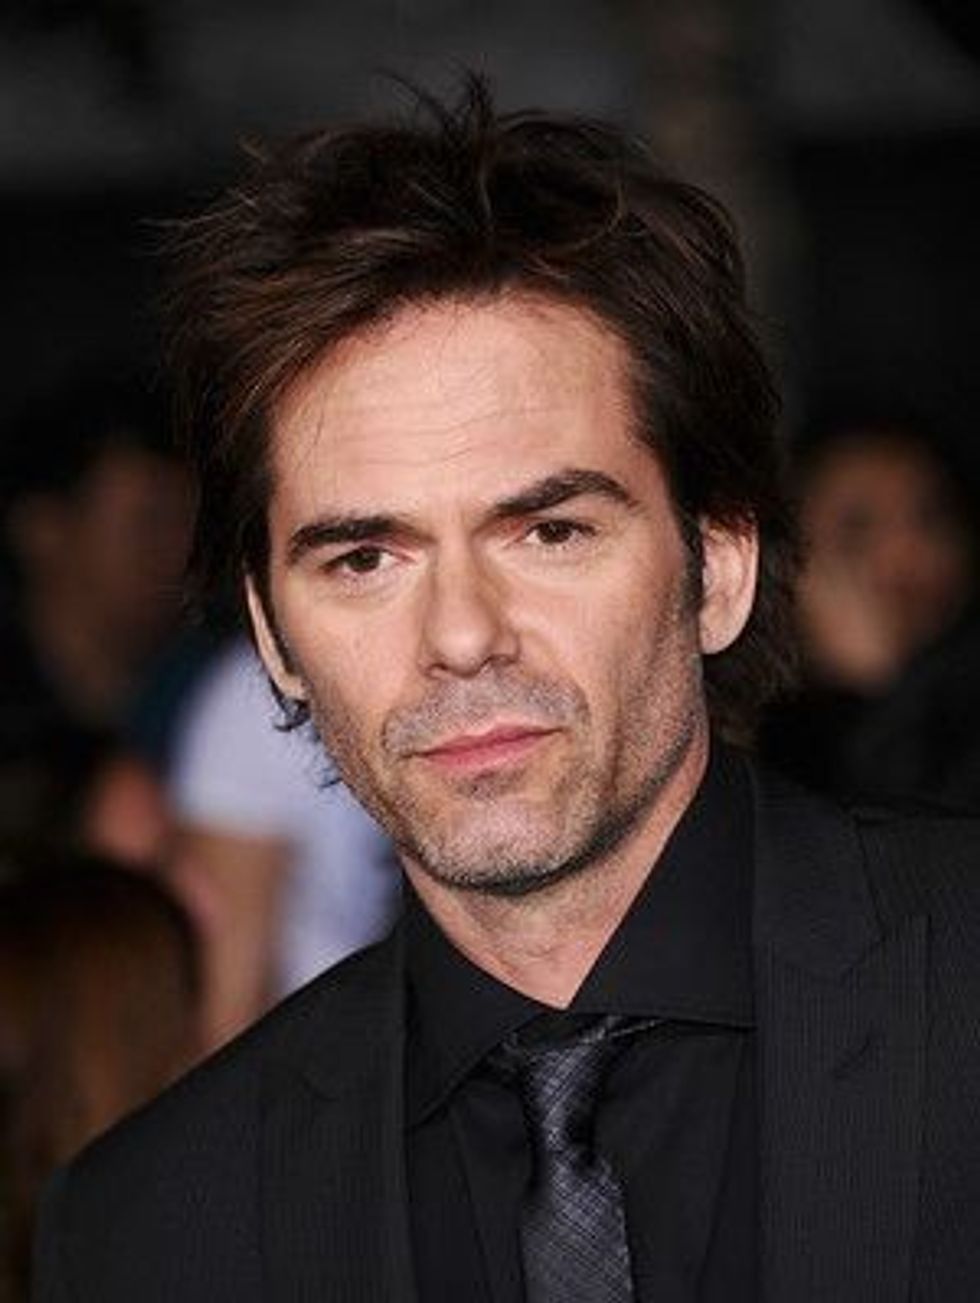 In the 'Twilight' trilogy and its sequels, actor Billy Burke played Charlie Swan, and in 'Red Riding Hood', he played Cesaire.